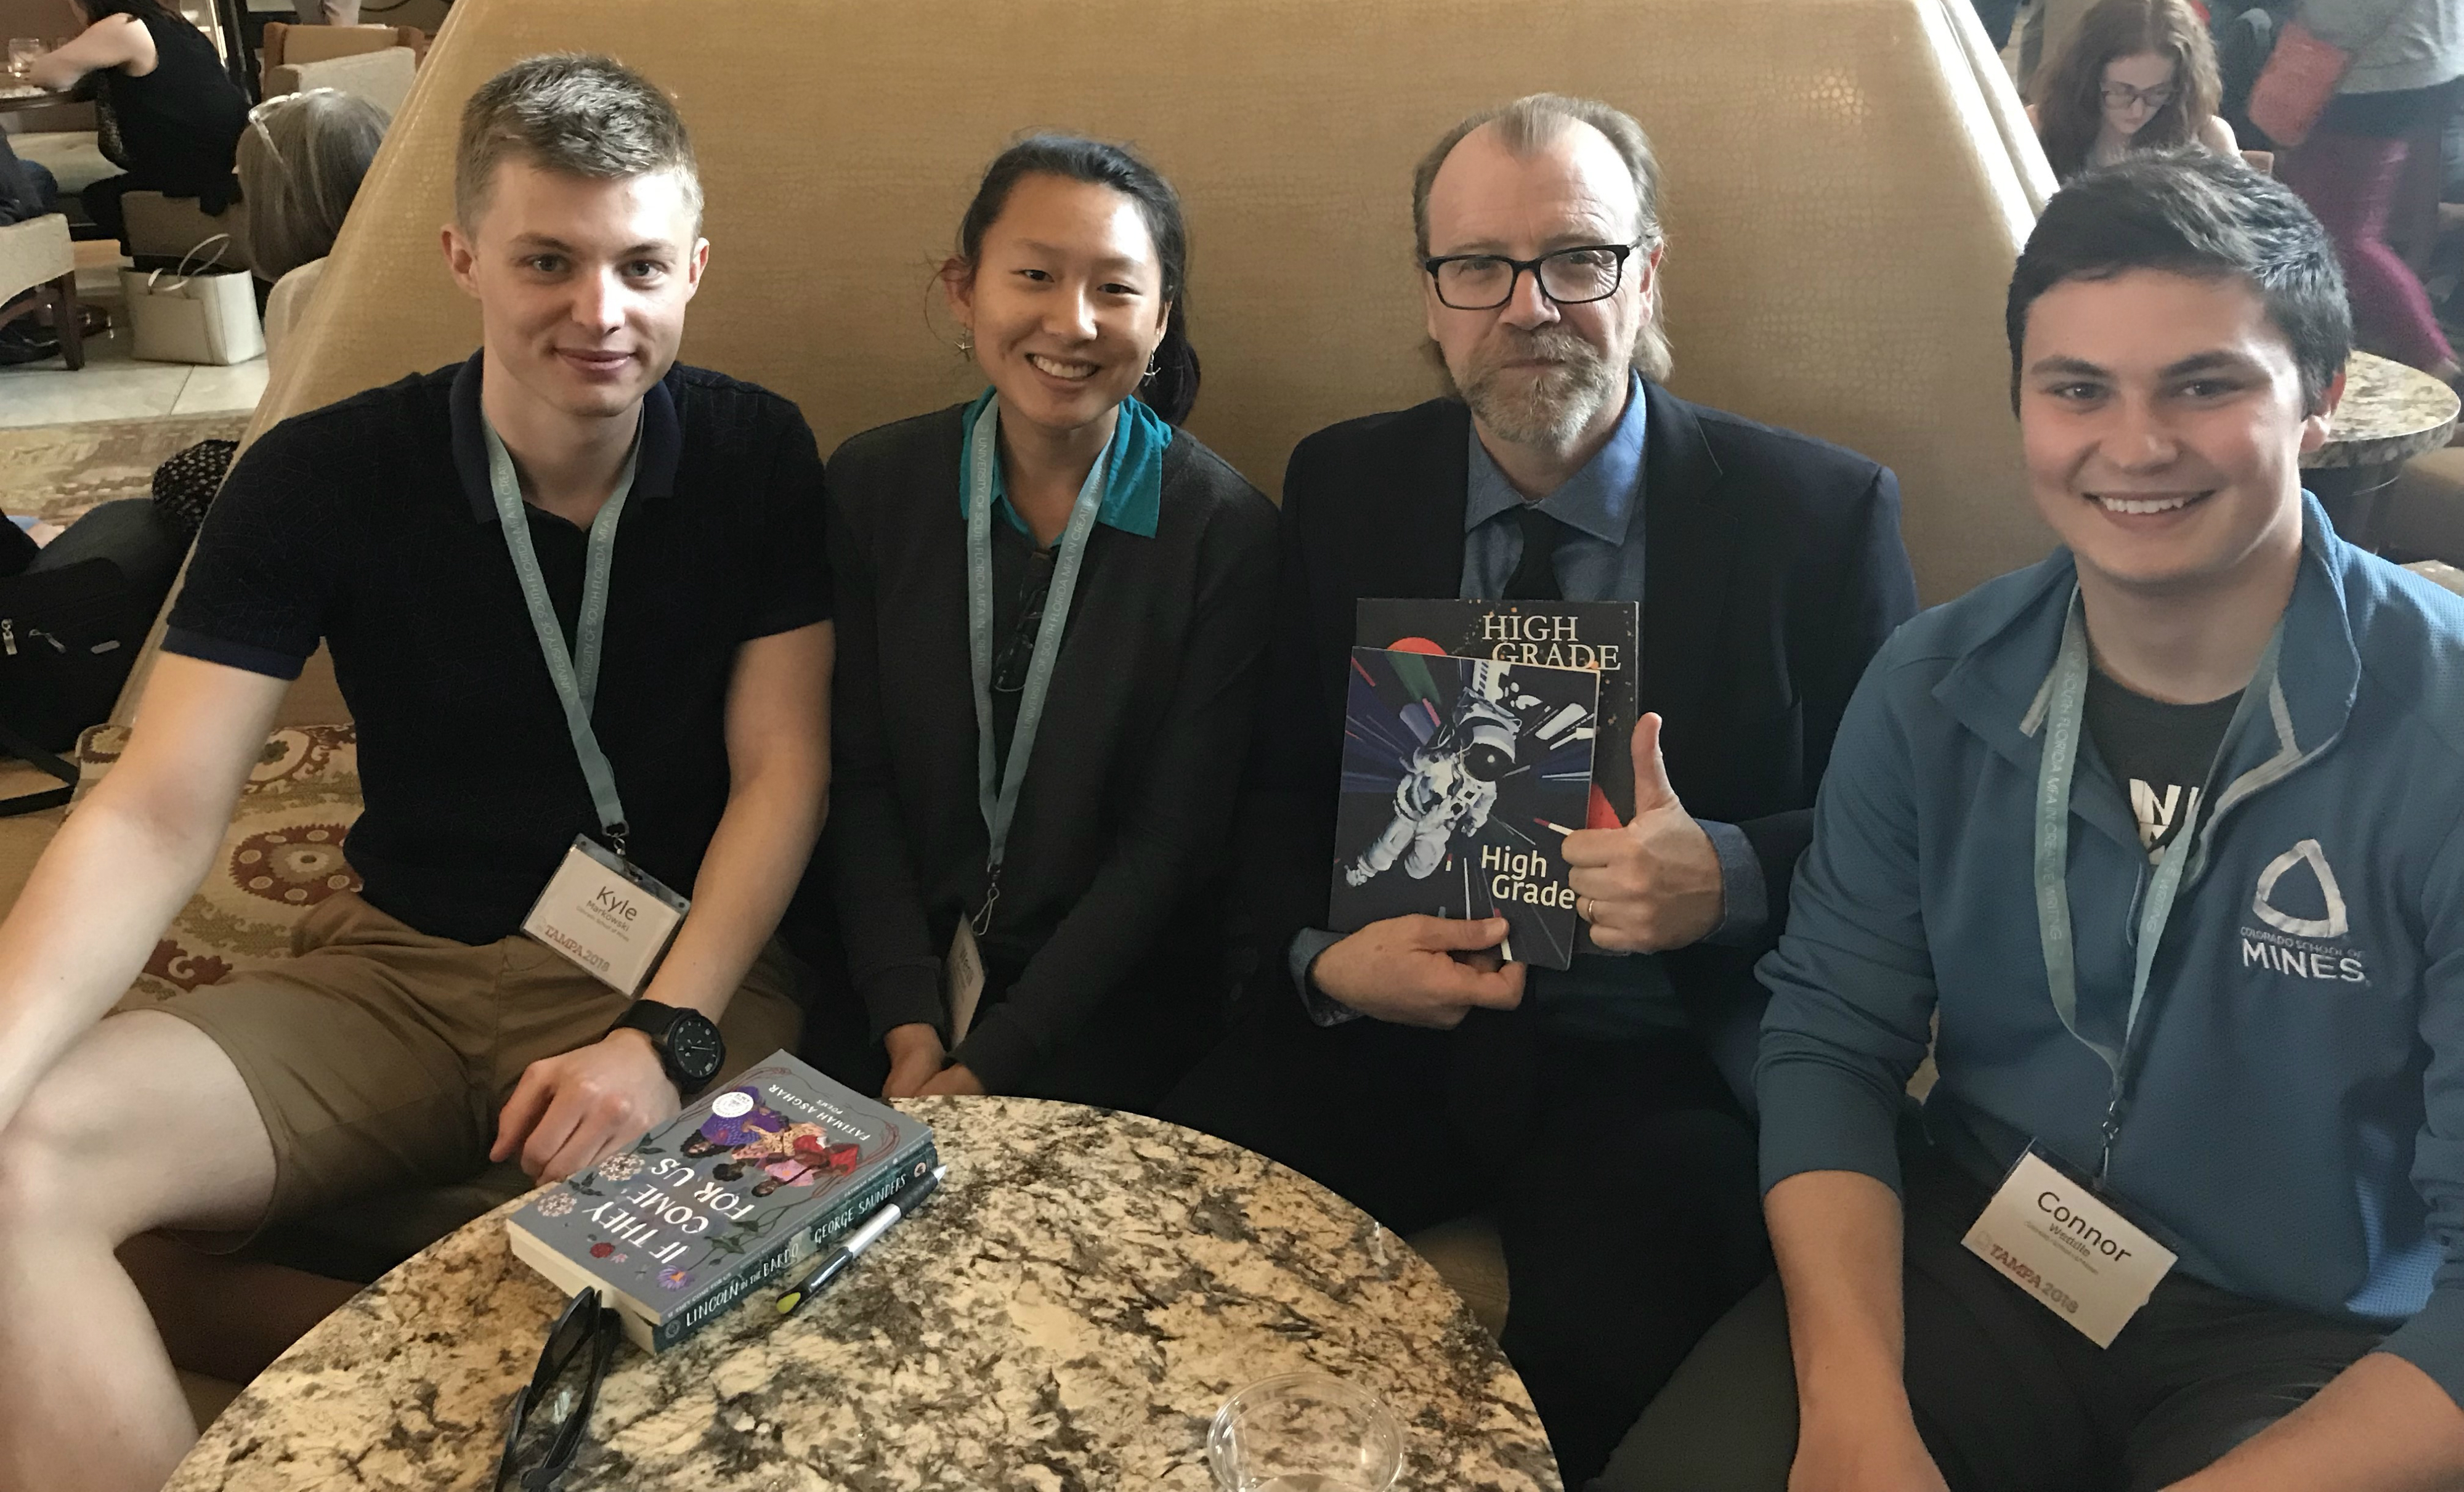 High Grade editors Wenli Dickinson, Kyle Markowski and Connor Weddle meet with George Saunders